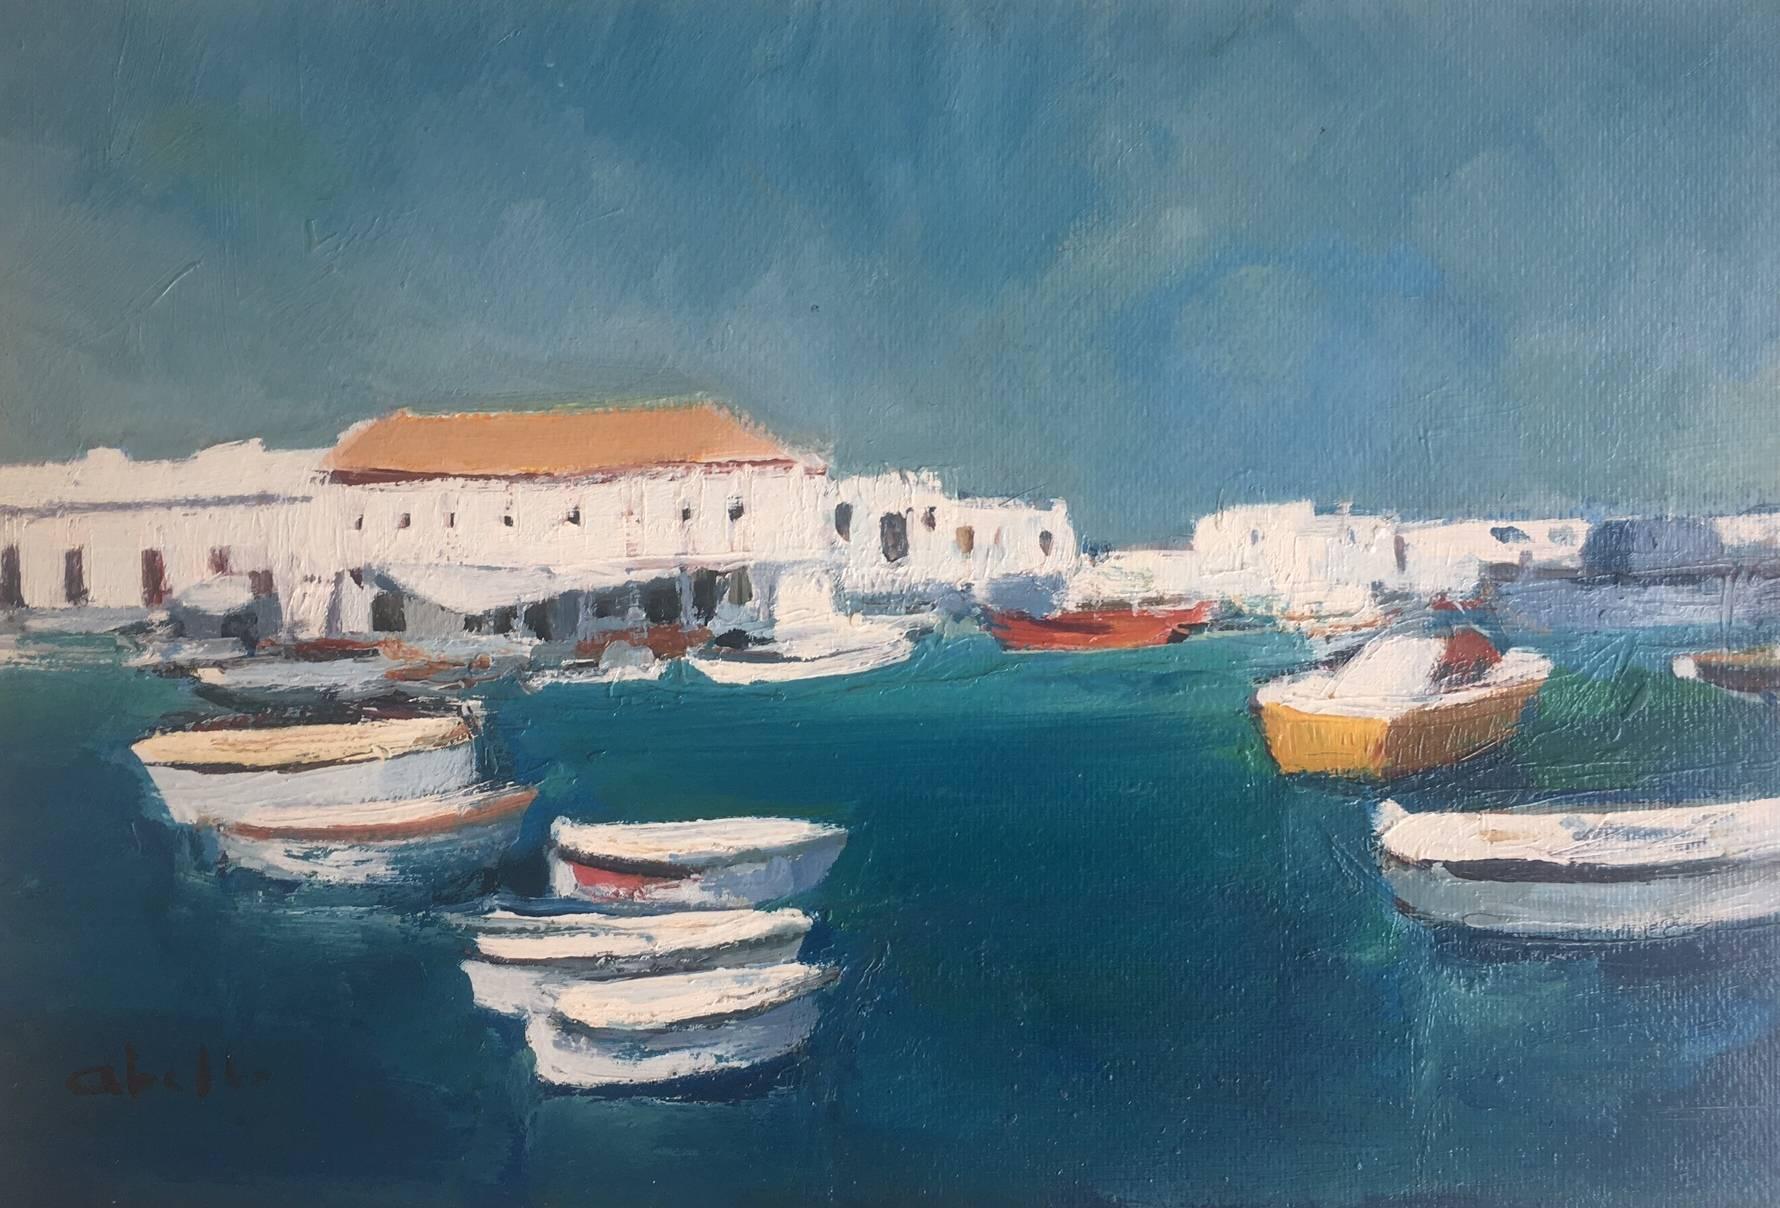 Abella- Marine Menorca Original cubist acrylic  Painting 
Juan Jose Abella Rubio was born in Estercuel, a hamlet anchored in the Teruel mining basin in March 1944. In his painting the ocher and reddish colors of his first environment are well